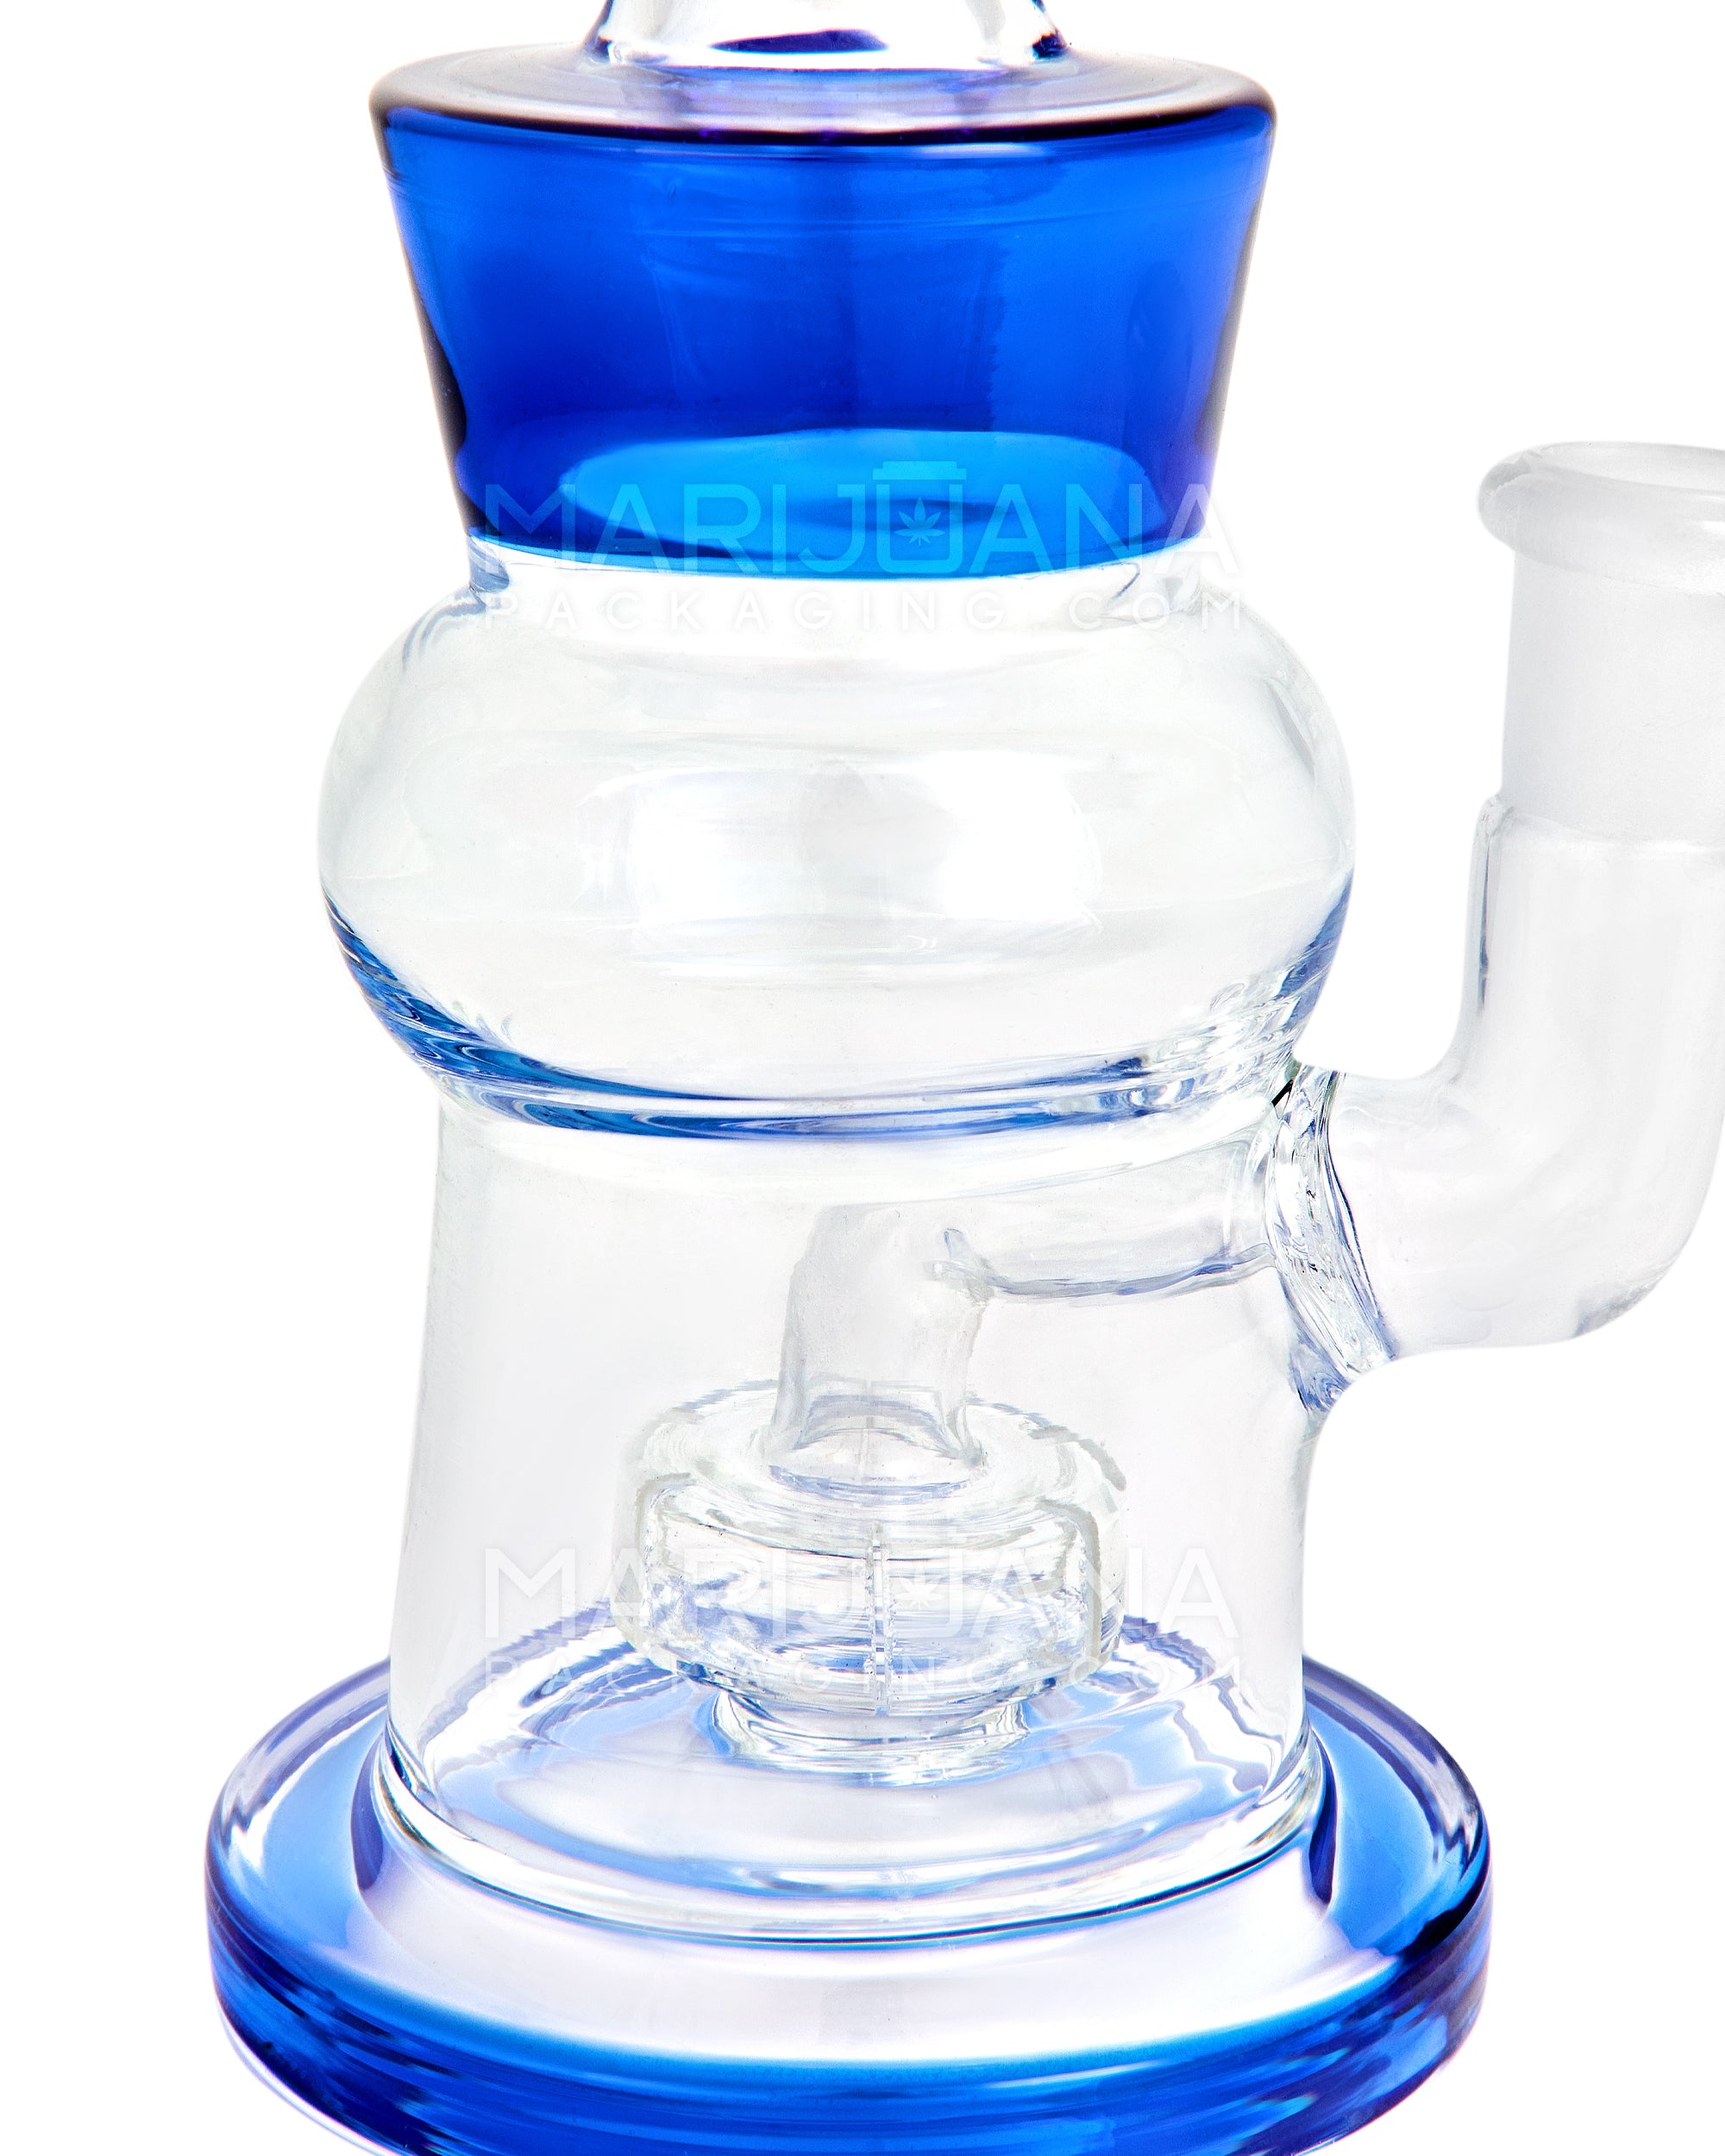 Straight Neck Showerhead Perc Glass Blunted Cone Water Pipe w/ Thick Base | 8in Tall - 14mm Bowl - Blue - 3